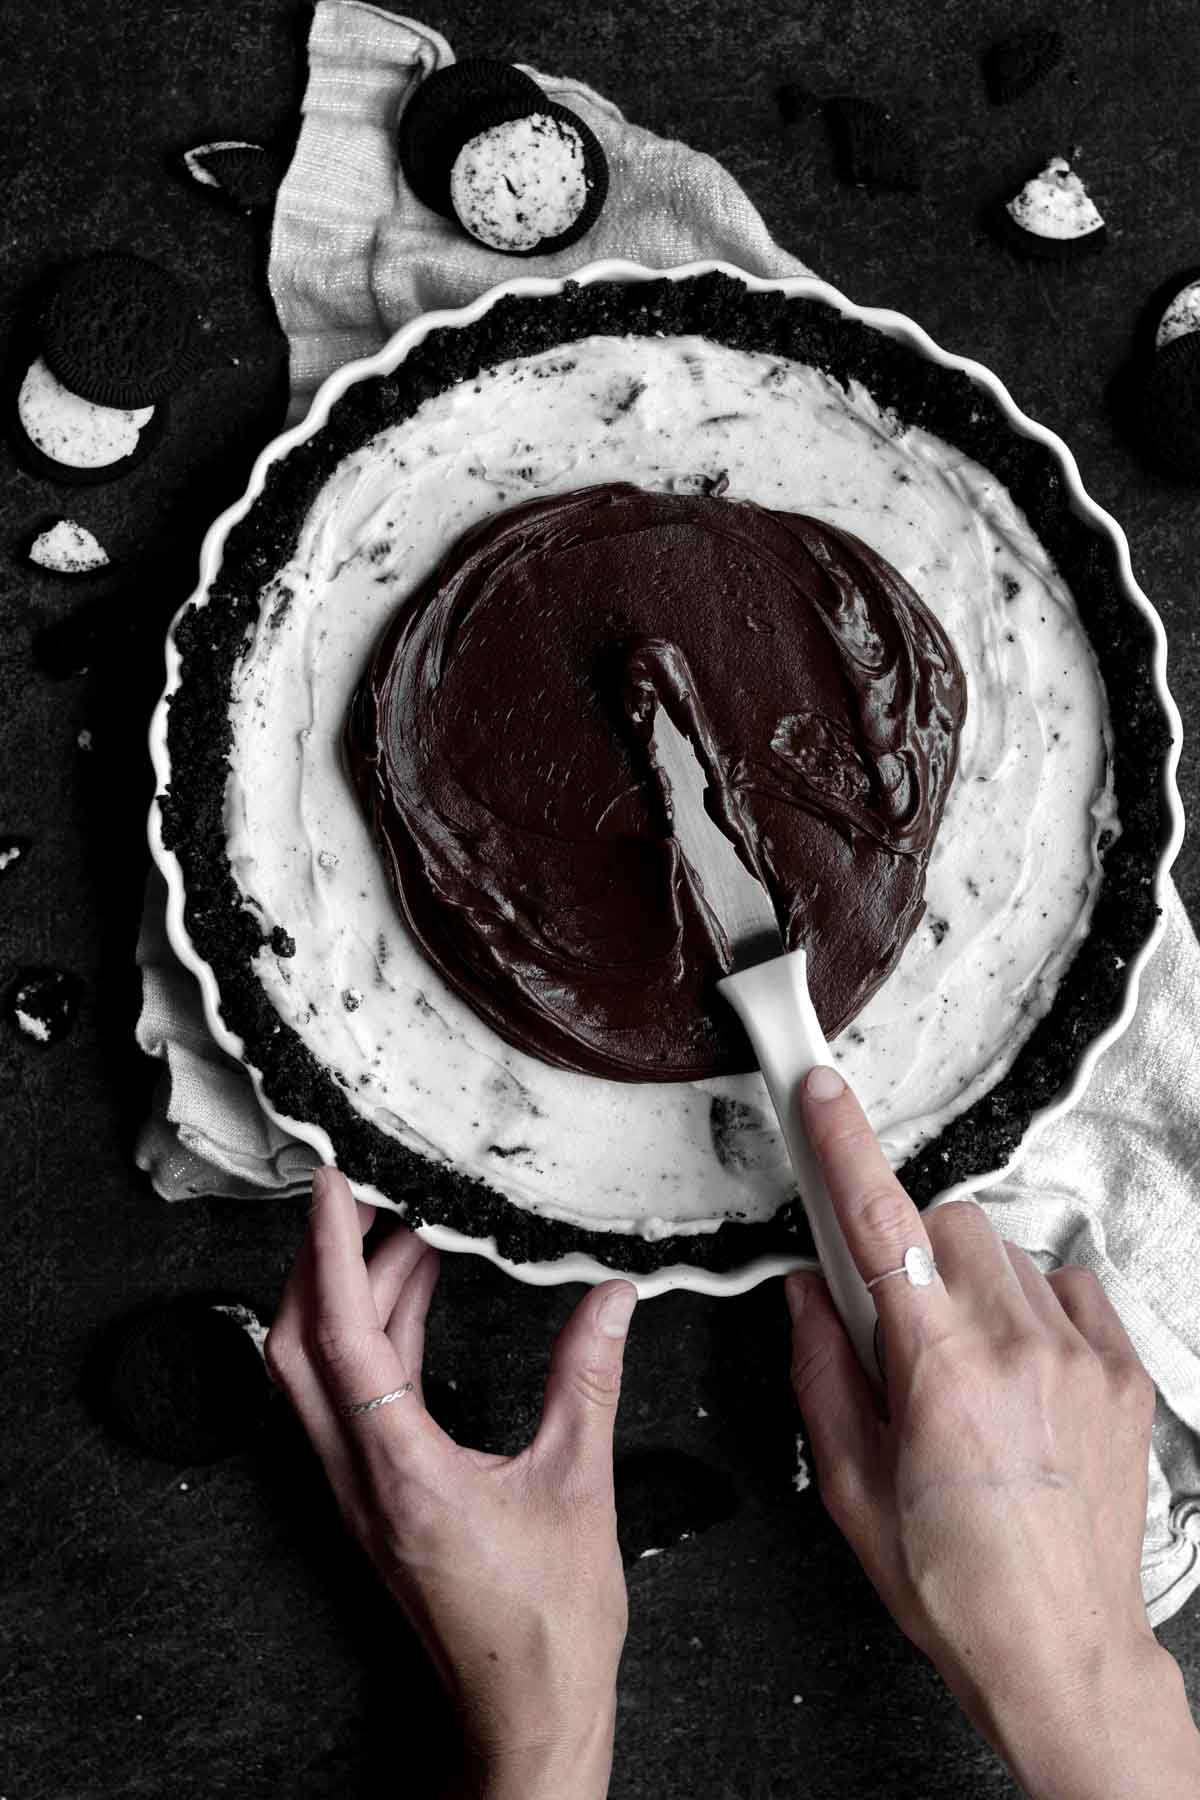 Adding the melted chocolate top to the tart.